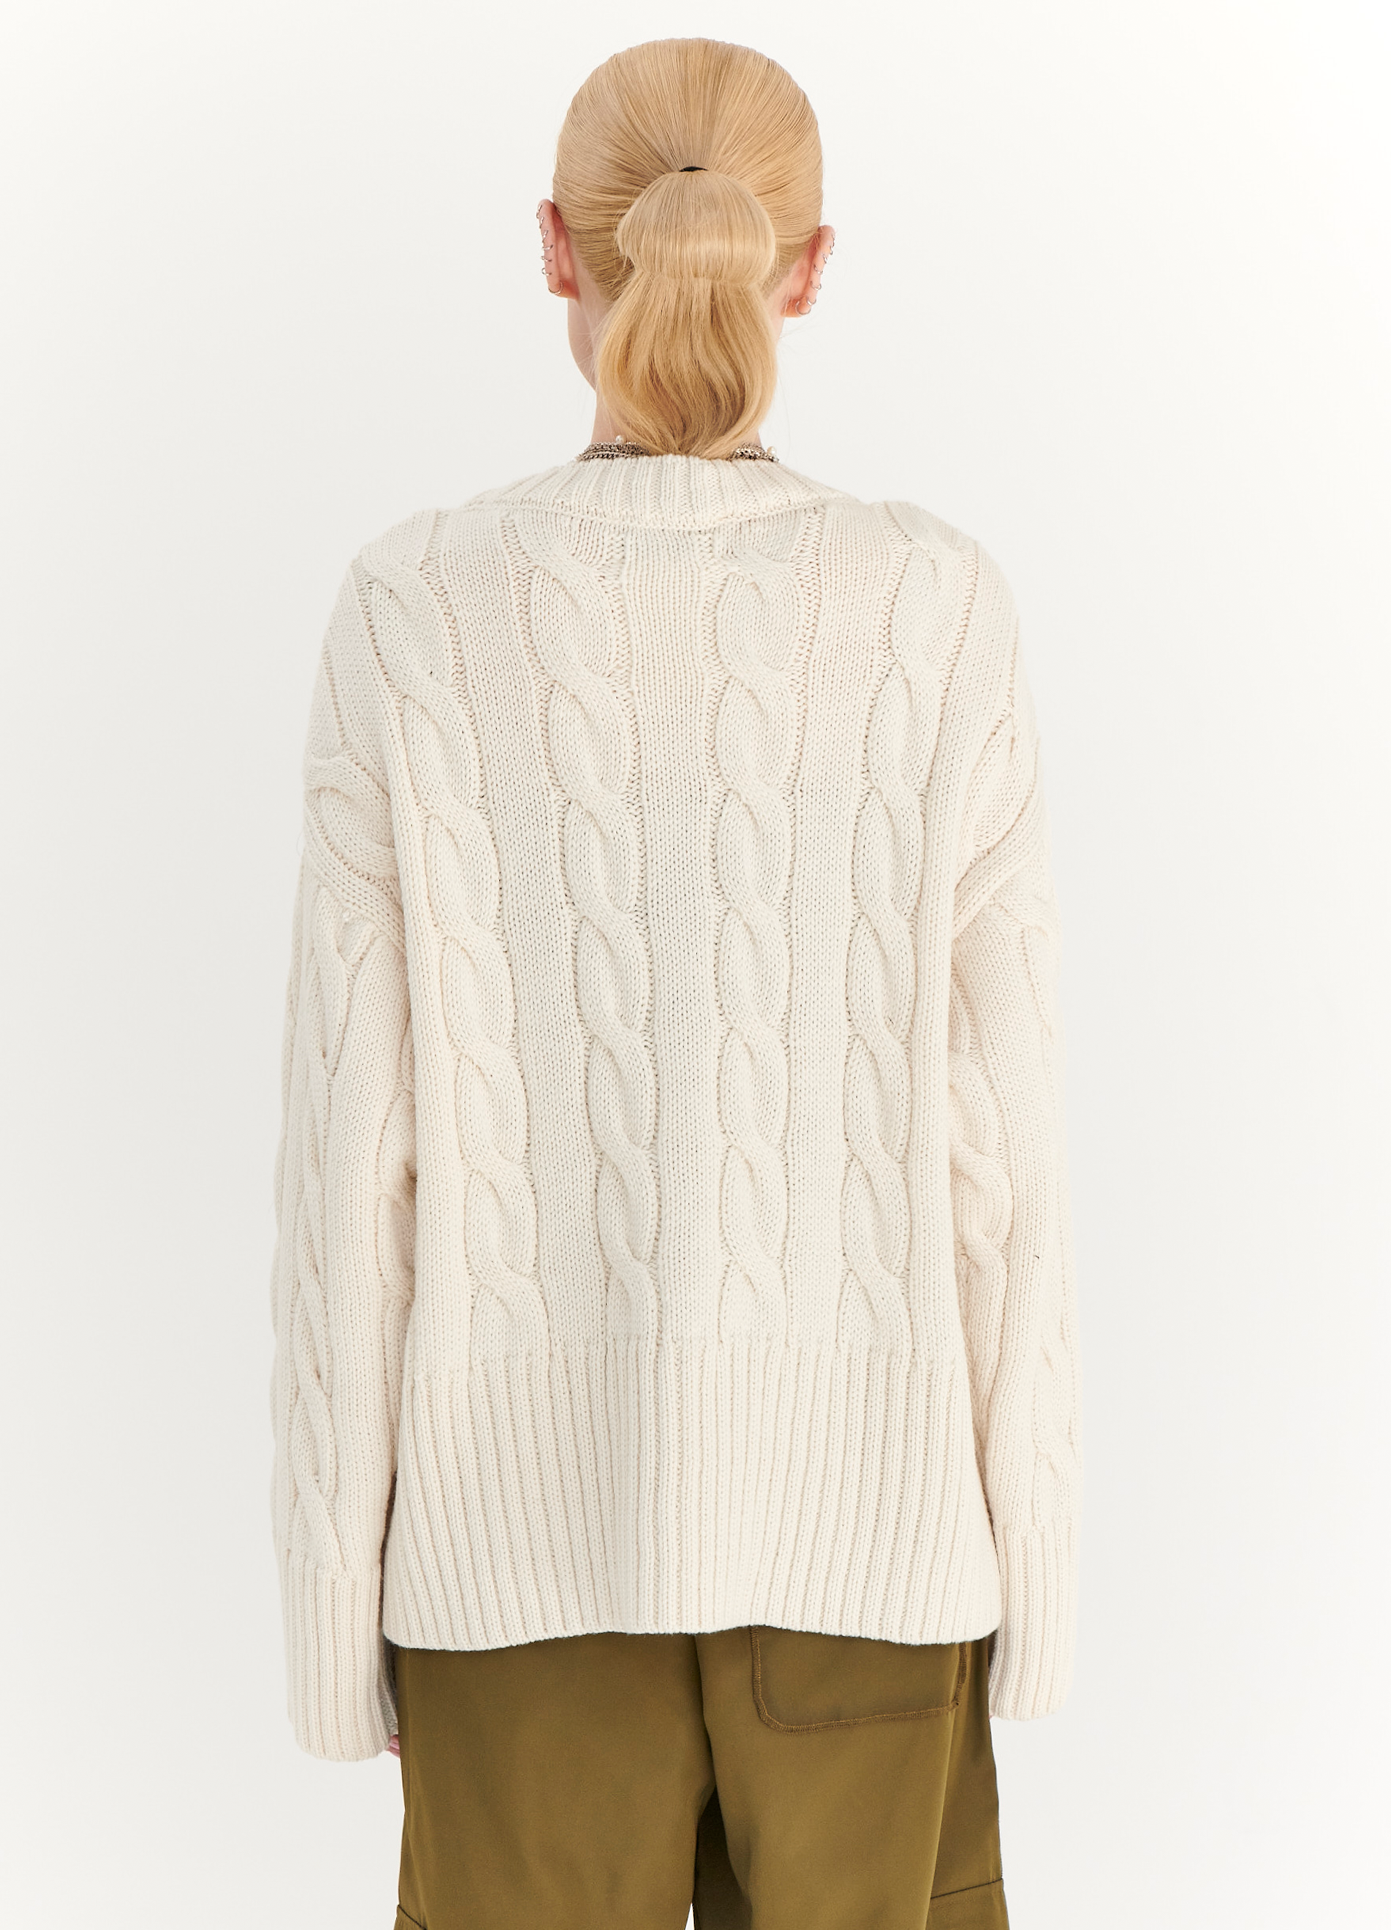 MONSE Pearl Detail Sweater in Ivory on model back detail view